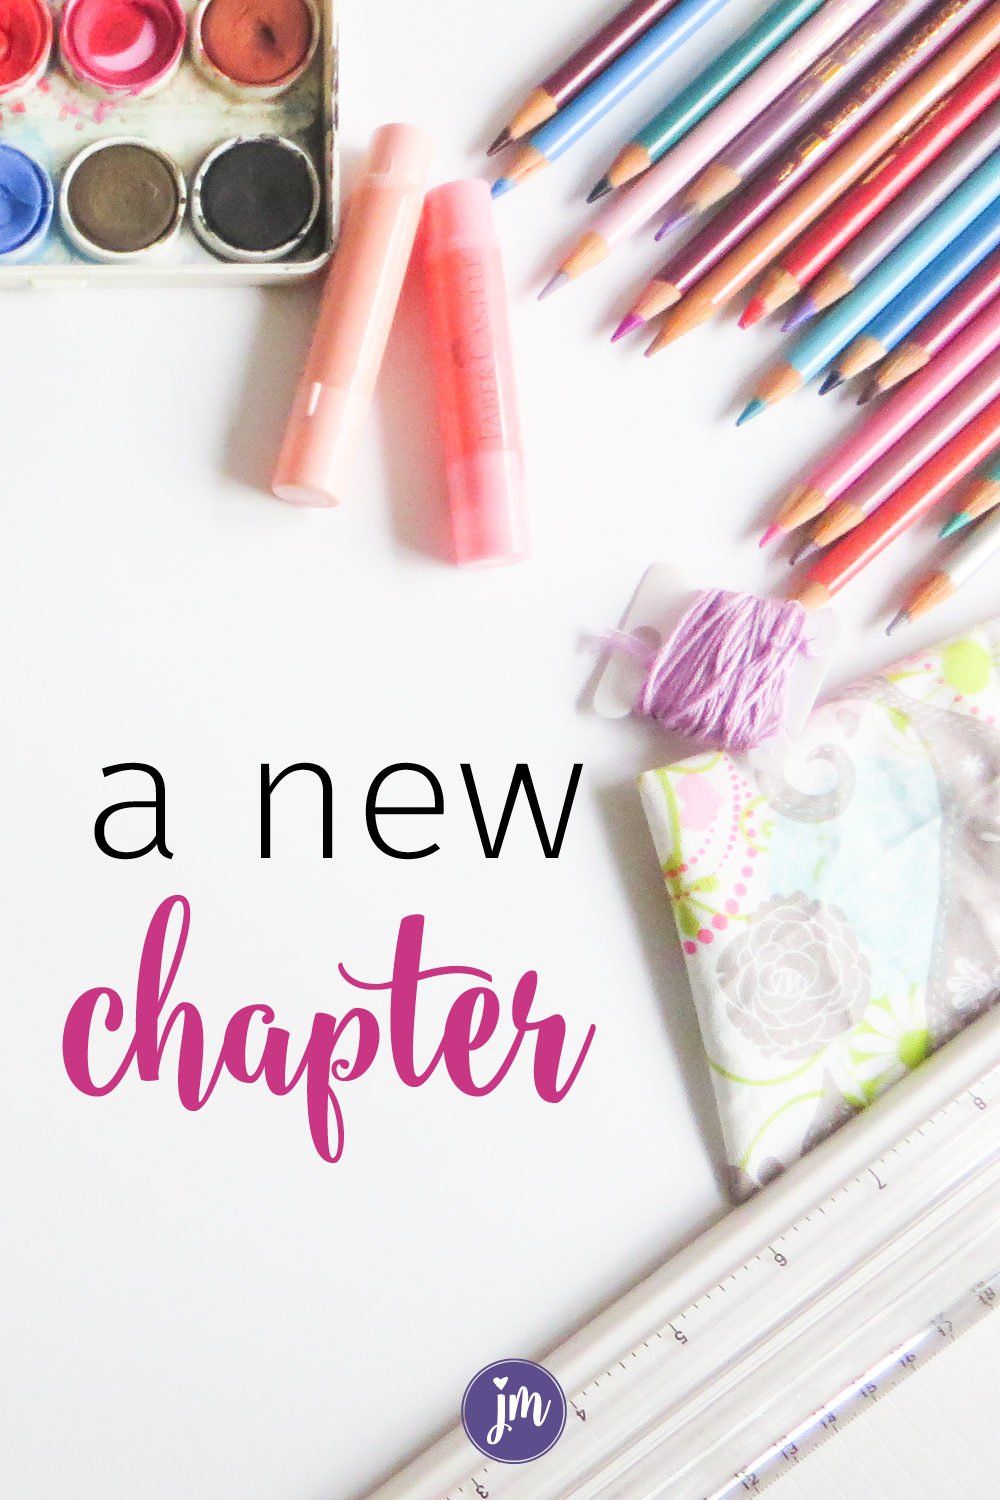 Hey there, our business is going through some big changes as of July 2019. Here's our update about the restructuring. All of our creative products and books will still be available so you can be encouraged to nurture your God-given creativity!